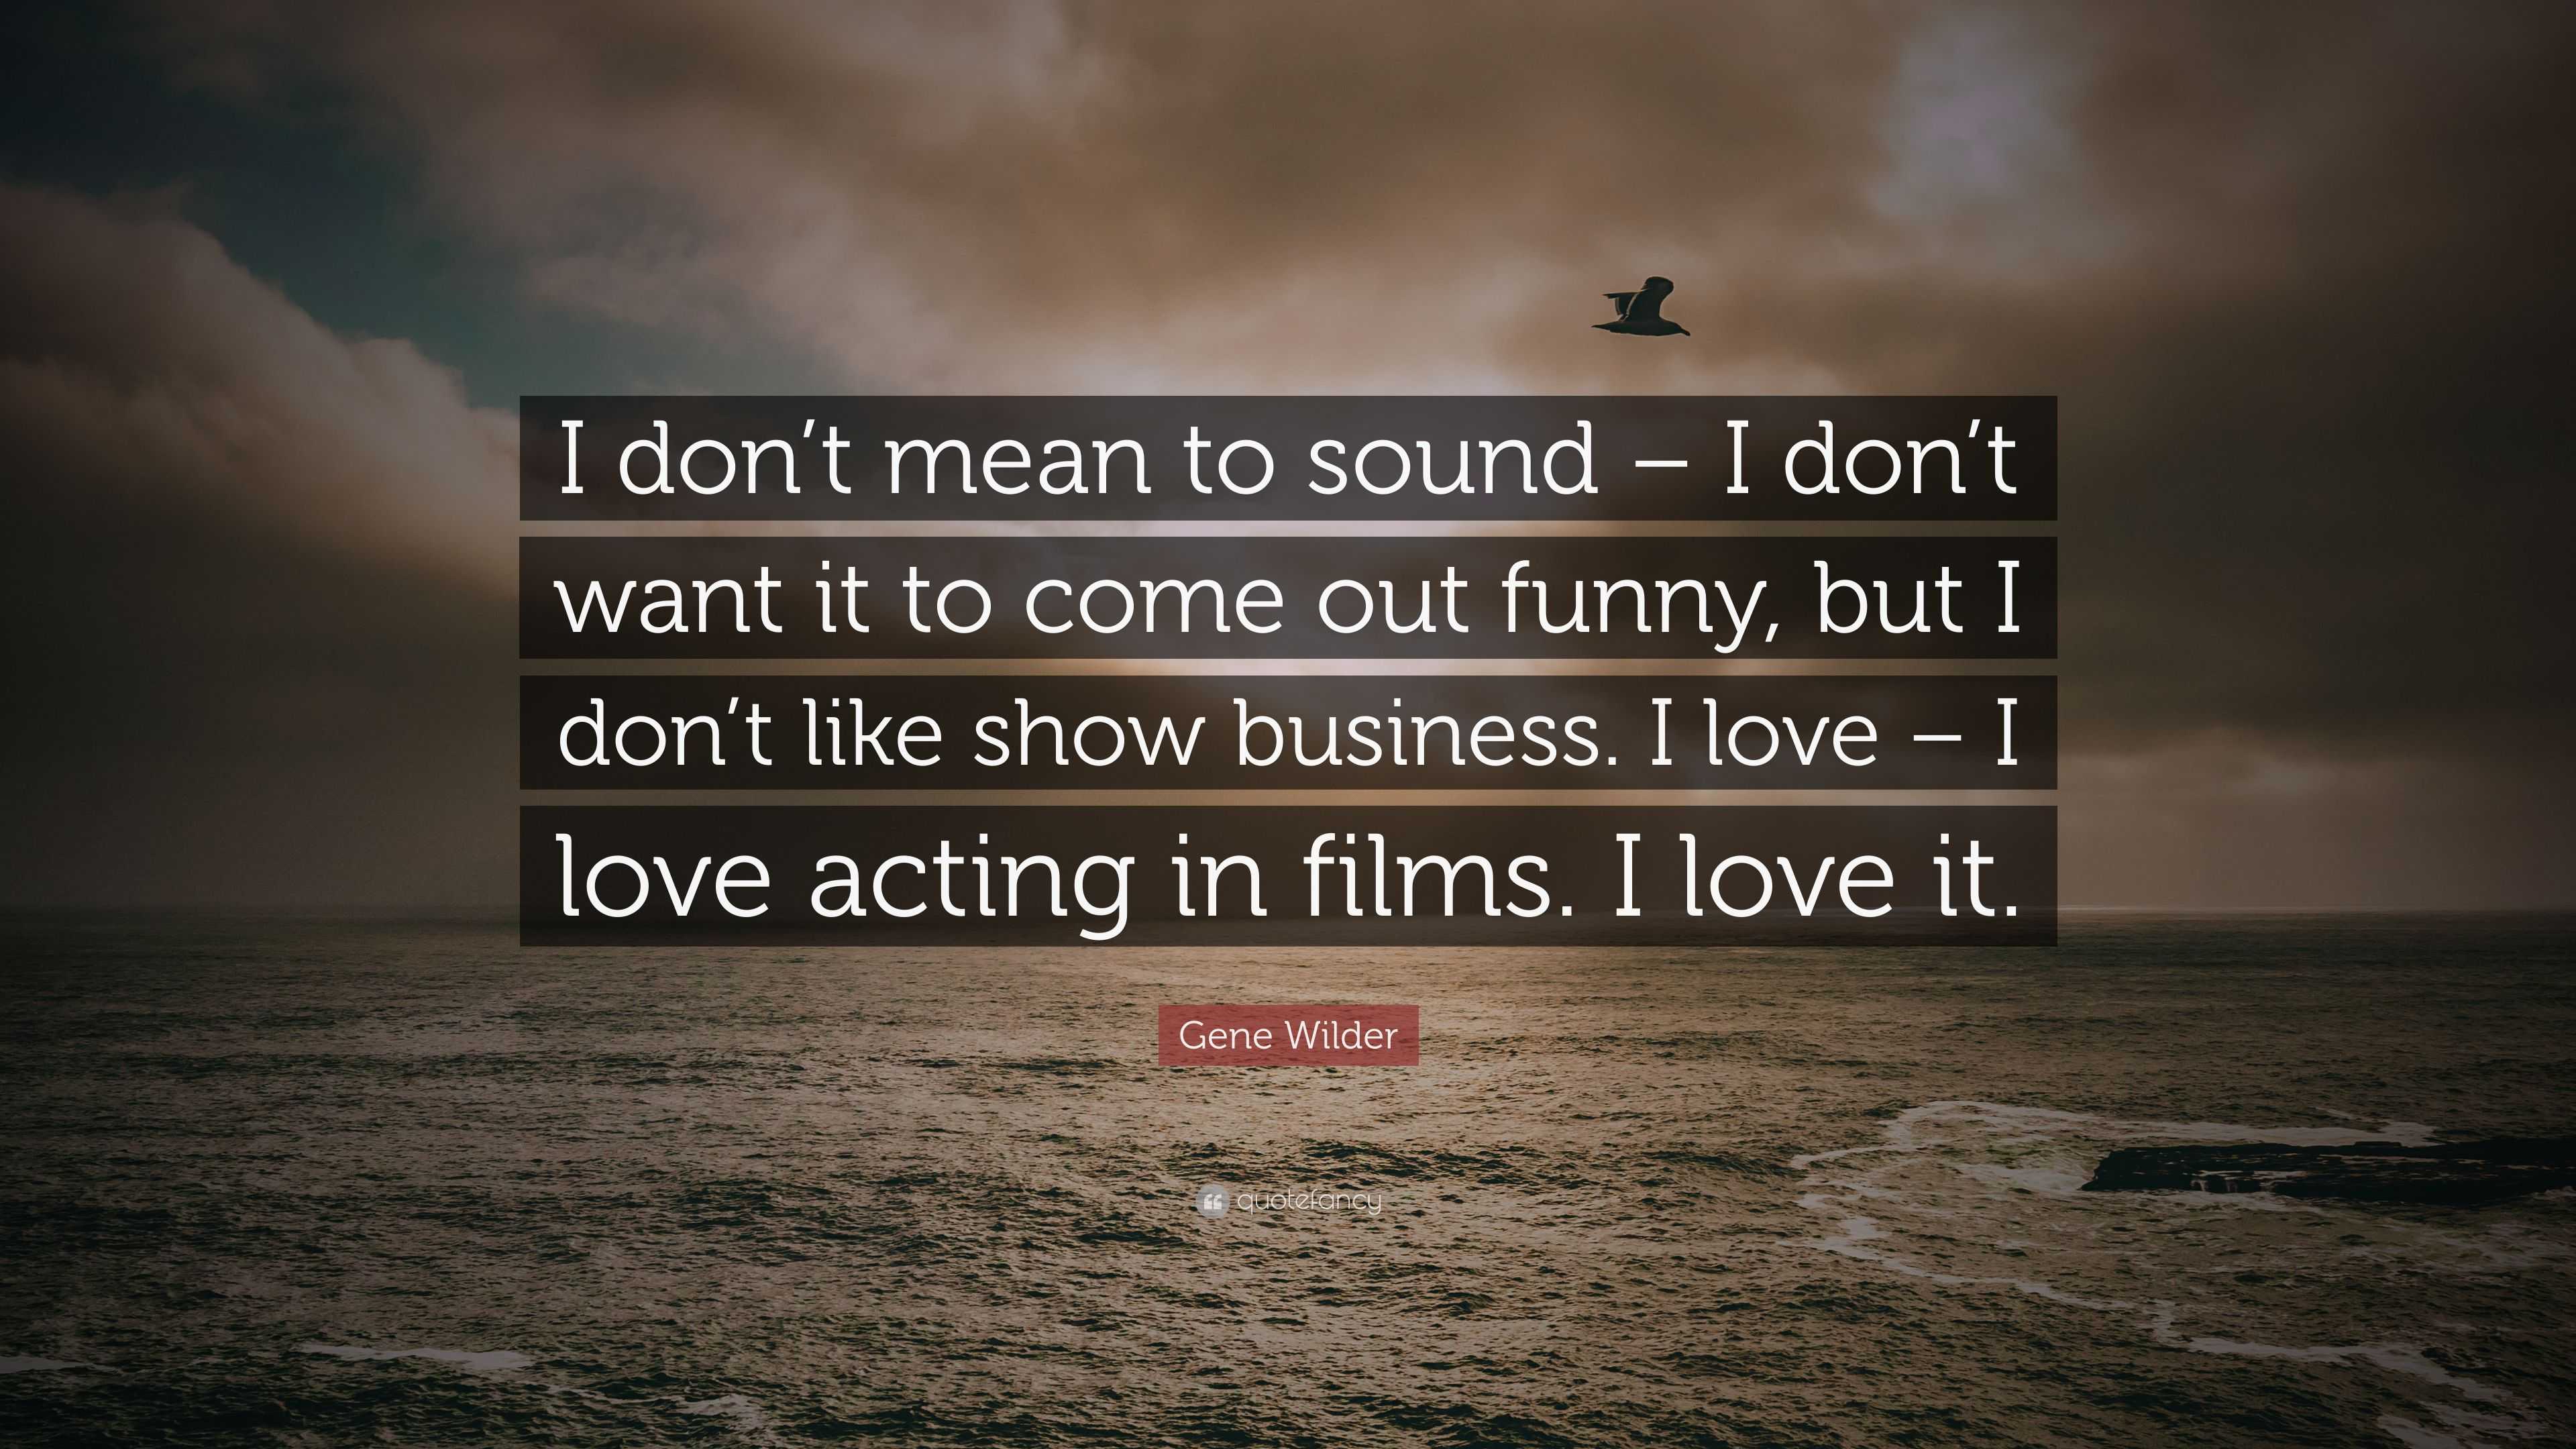 Gene Wilder Quote: “I don't mean to sound – I don't want it to come out  funny, but I don't like show business. I love – I love acting in fil...”